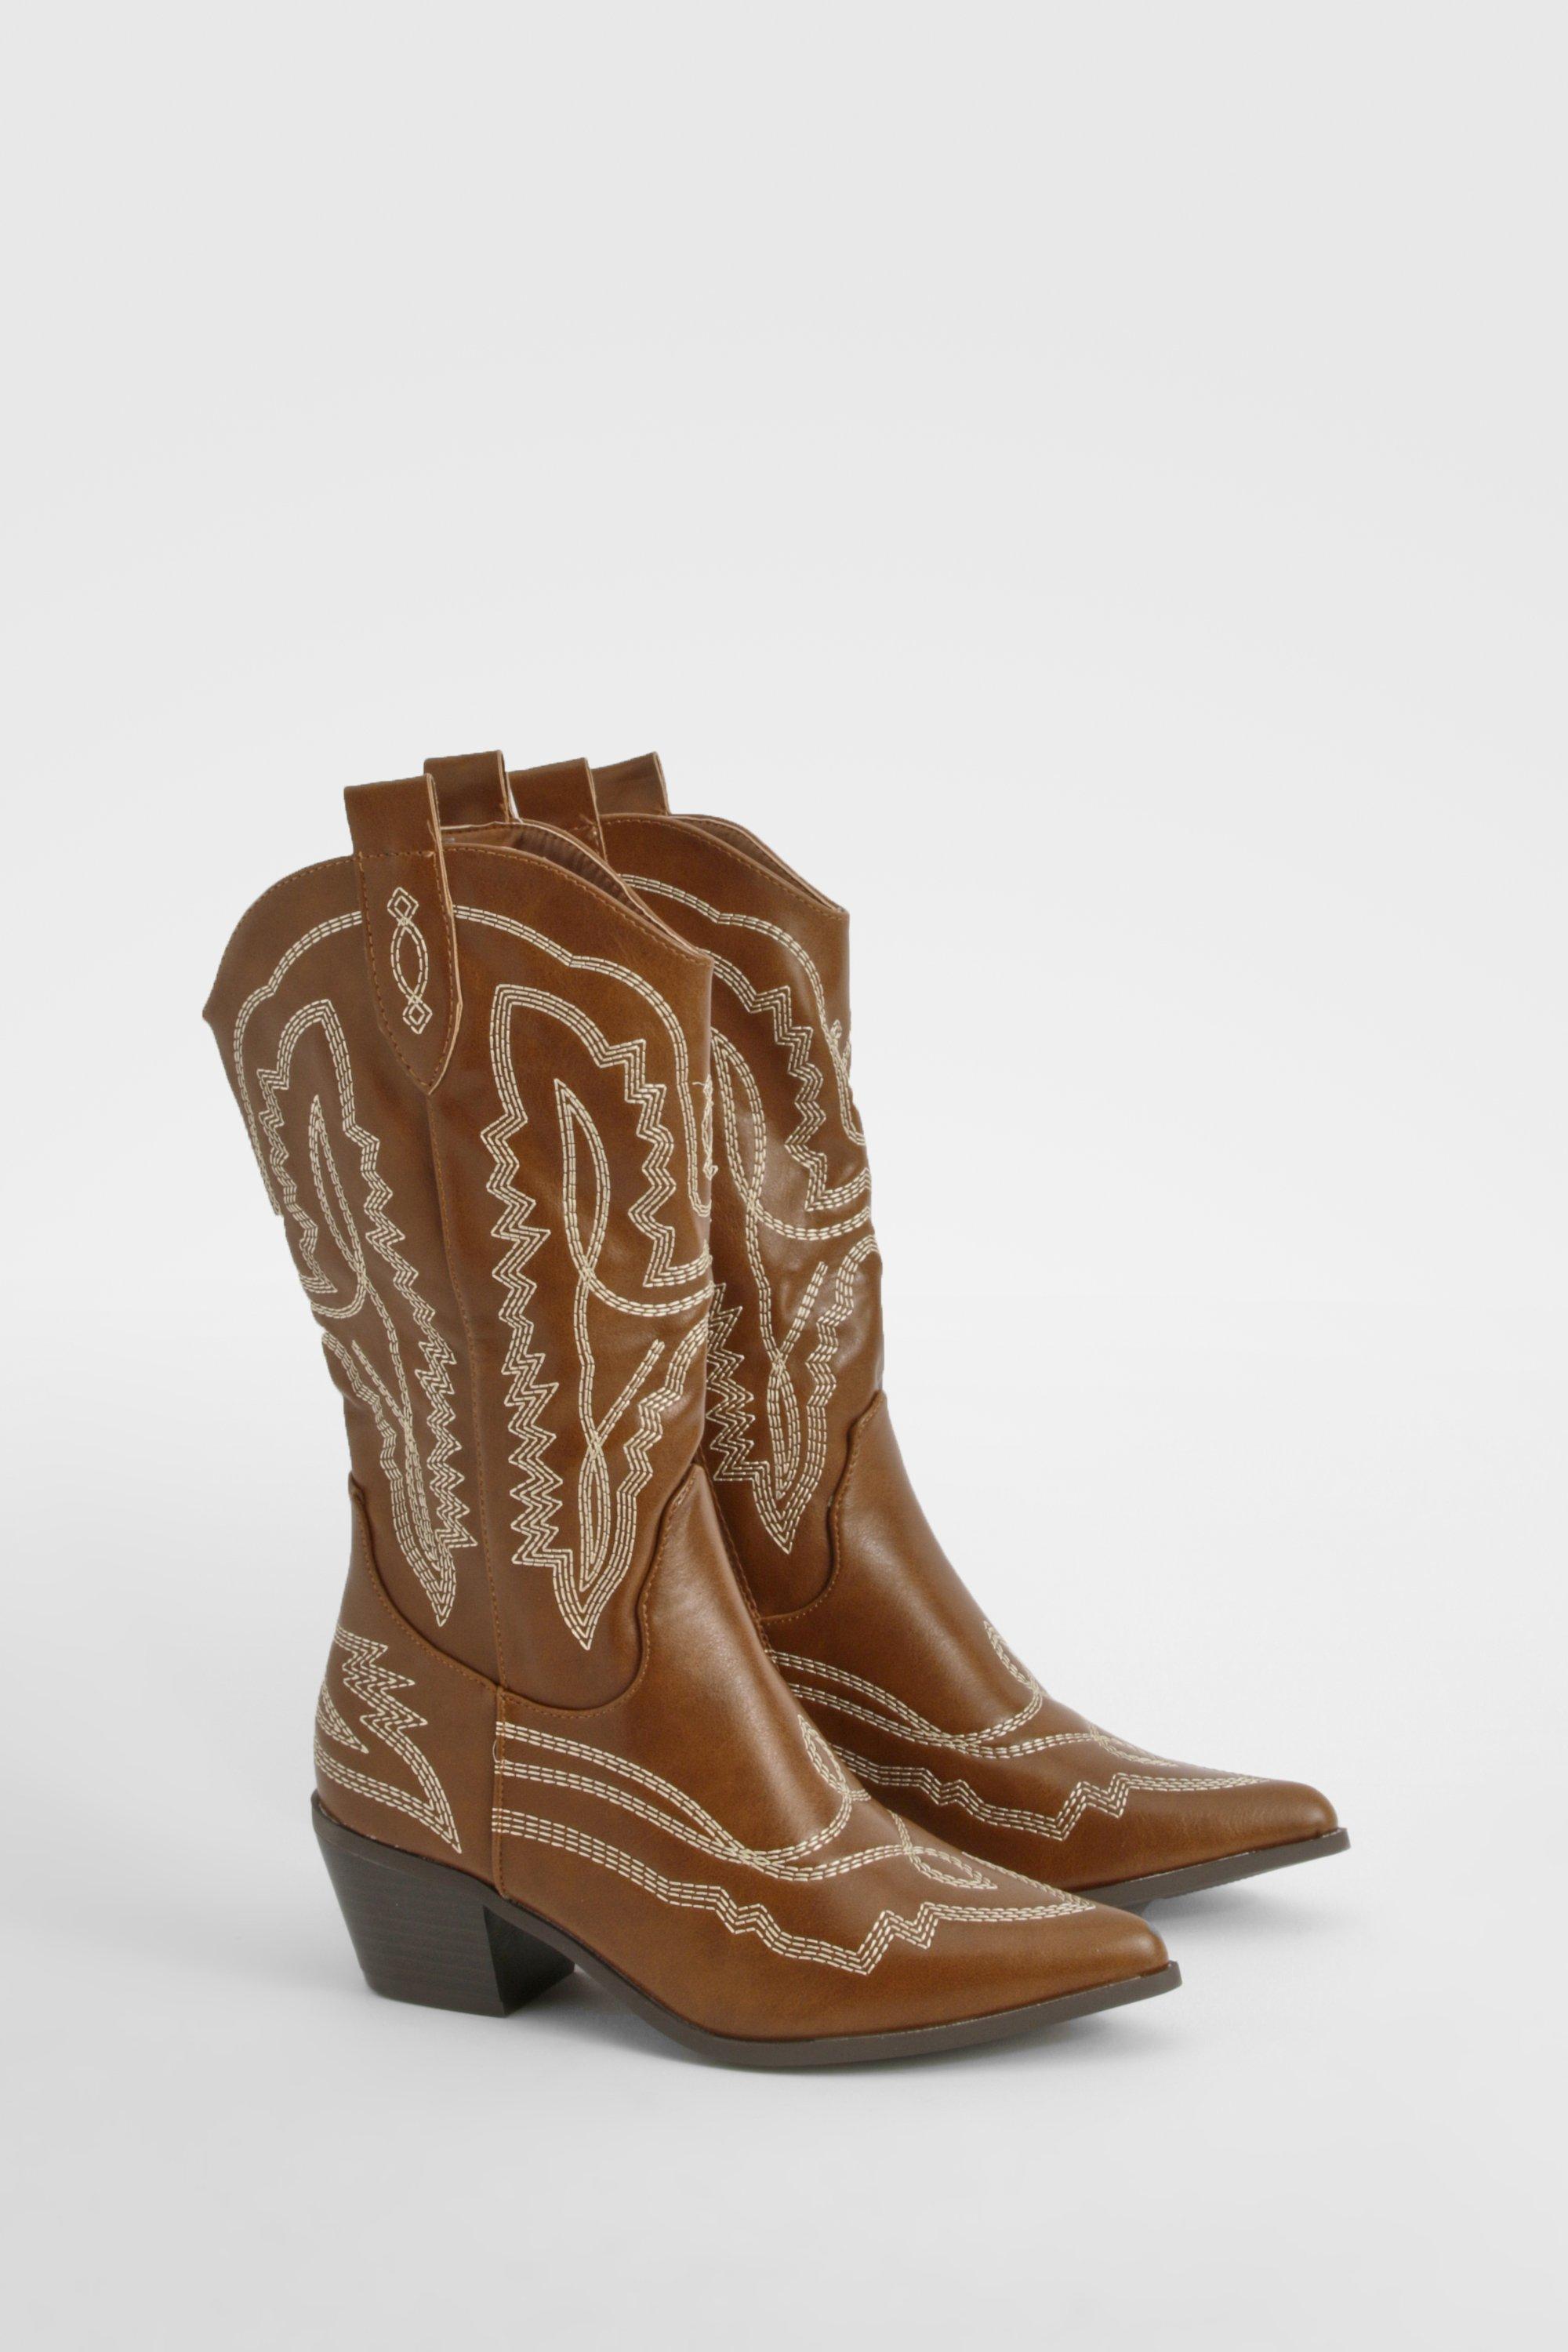 Boohoo Contrast Stitching Western Cowboy Boots, Camel